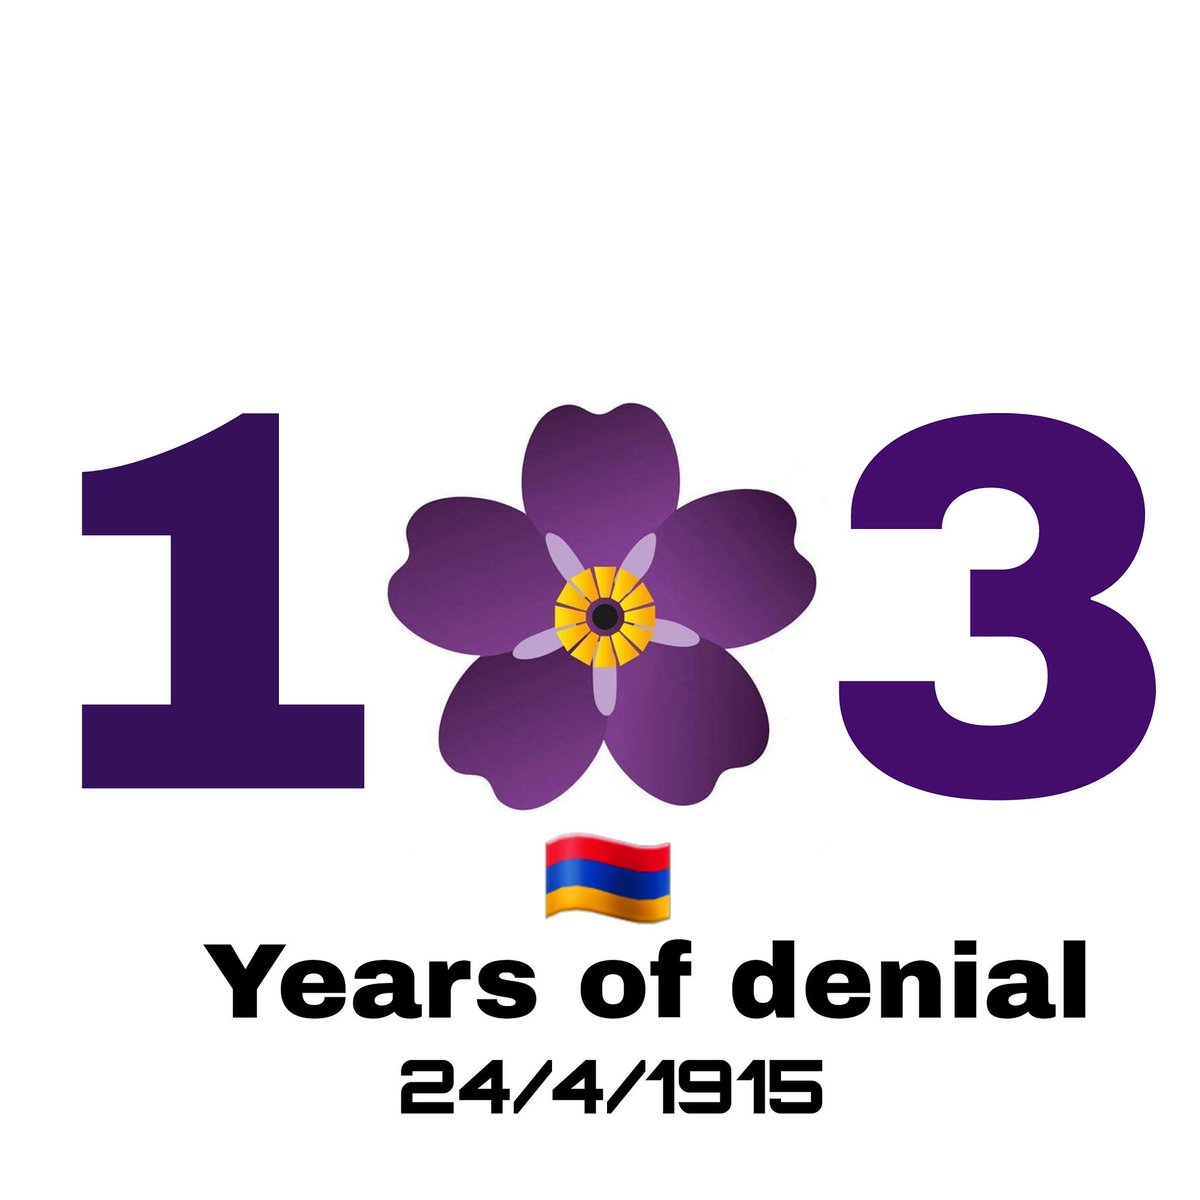 #armenian #genocide #never #forget  #lebanese #Armenians #together #tags4like  #yearsofdenial